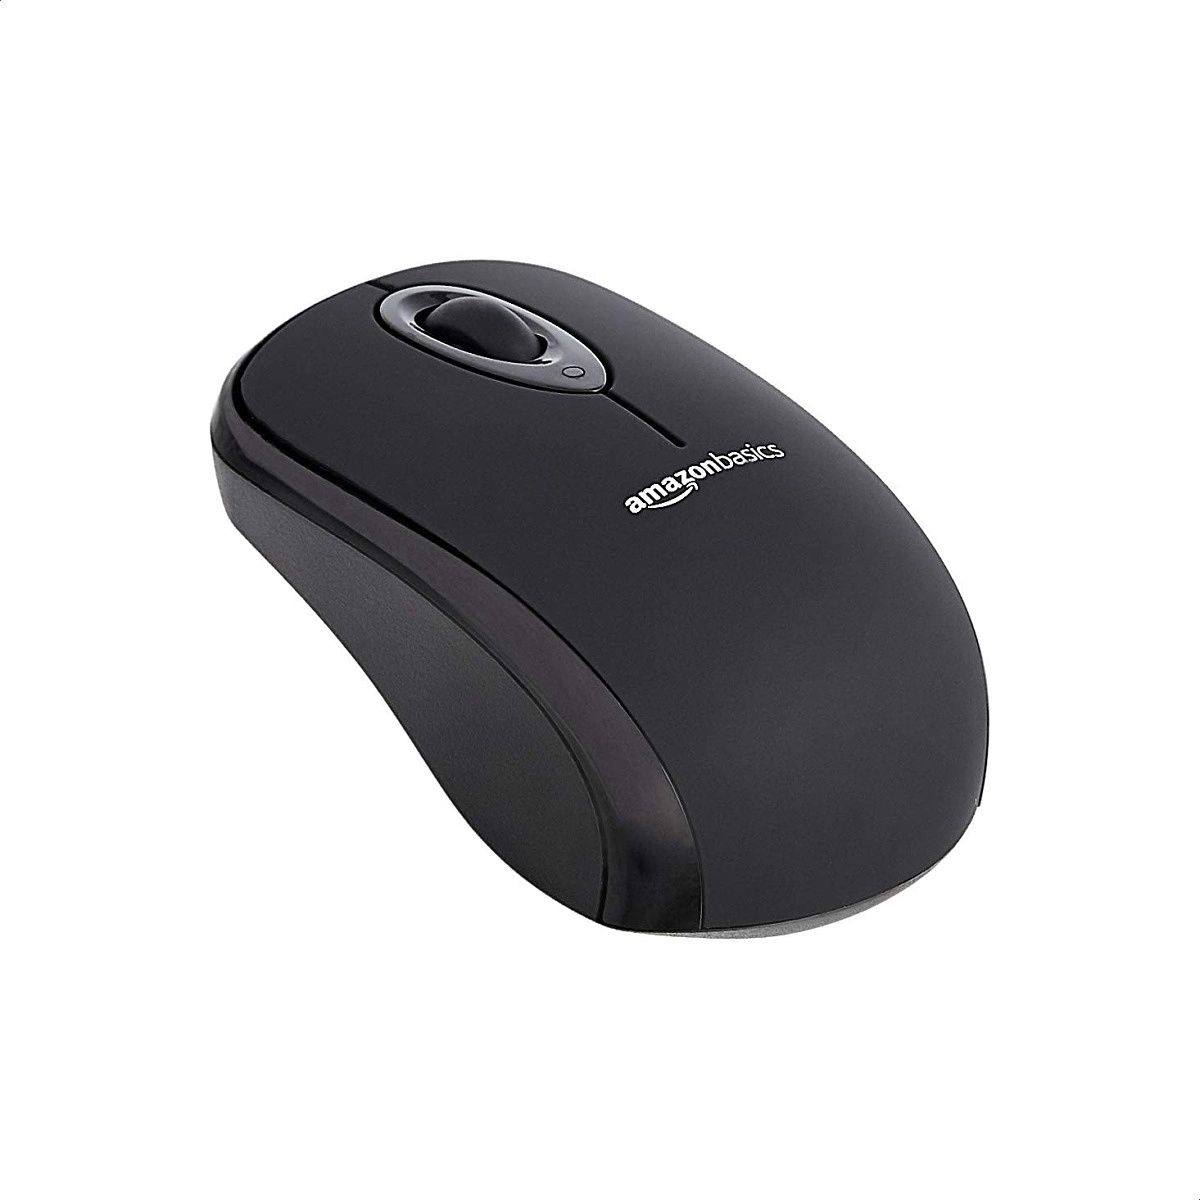 This mouse from Amazon is the one to buy if you're on a low budget. It's wireless, includes two non-rechargeable AA batteries, and has five color options.